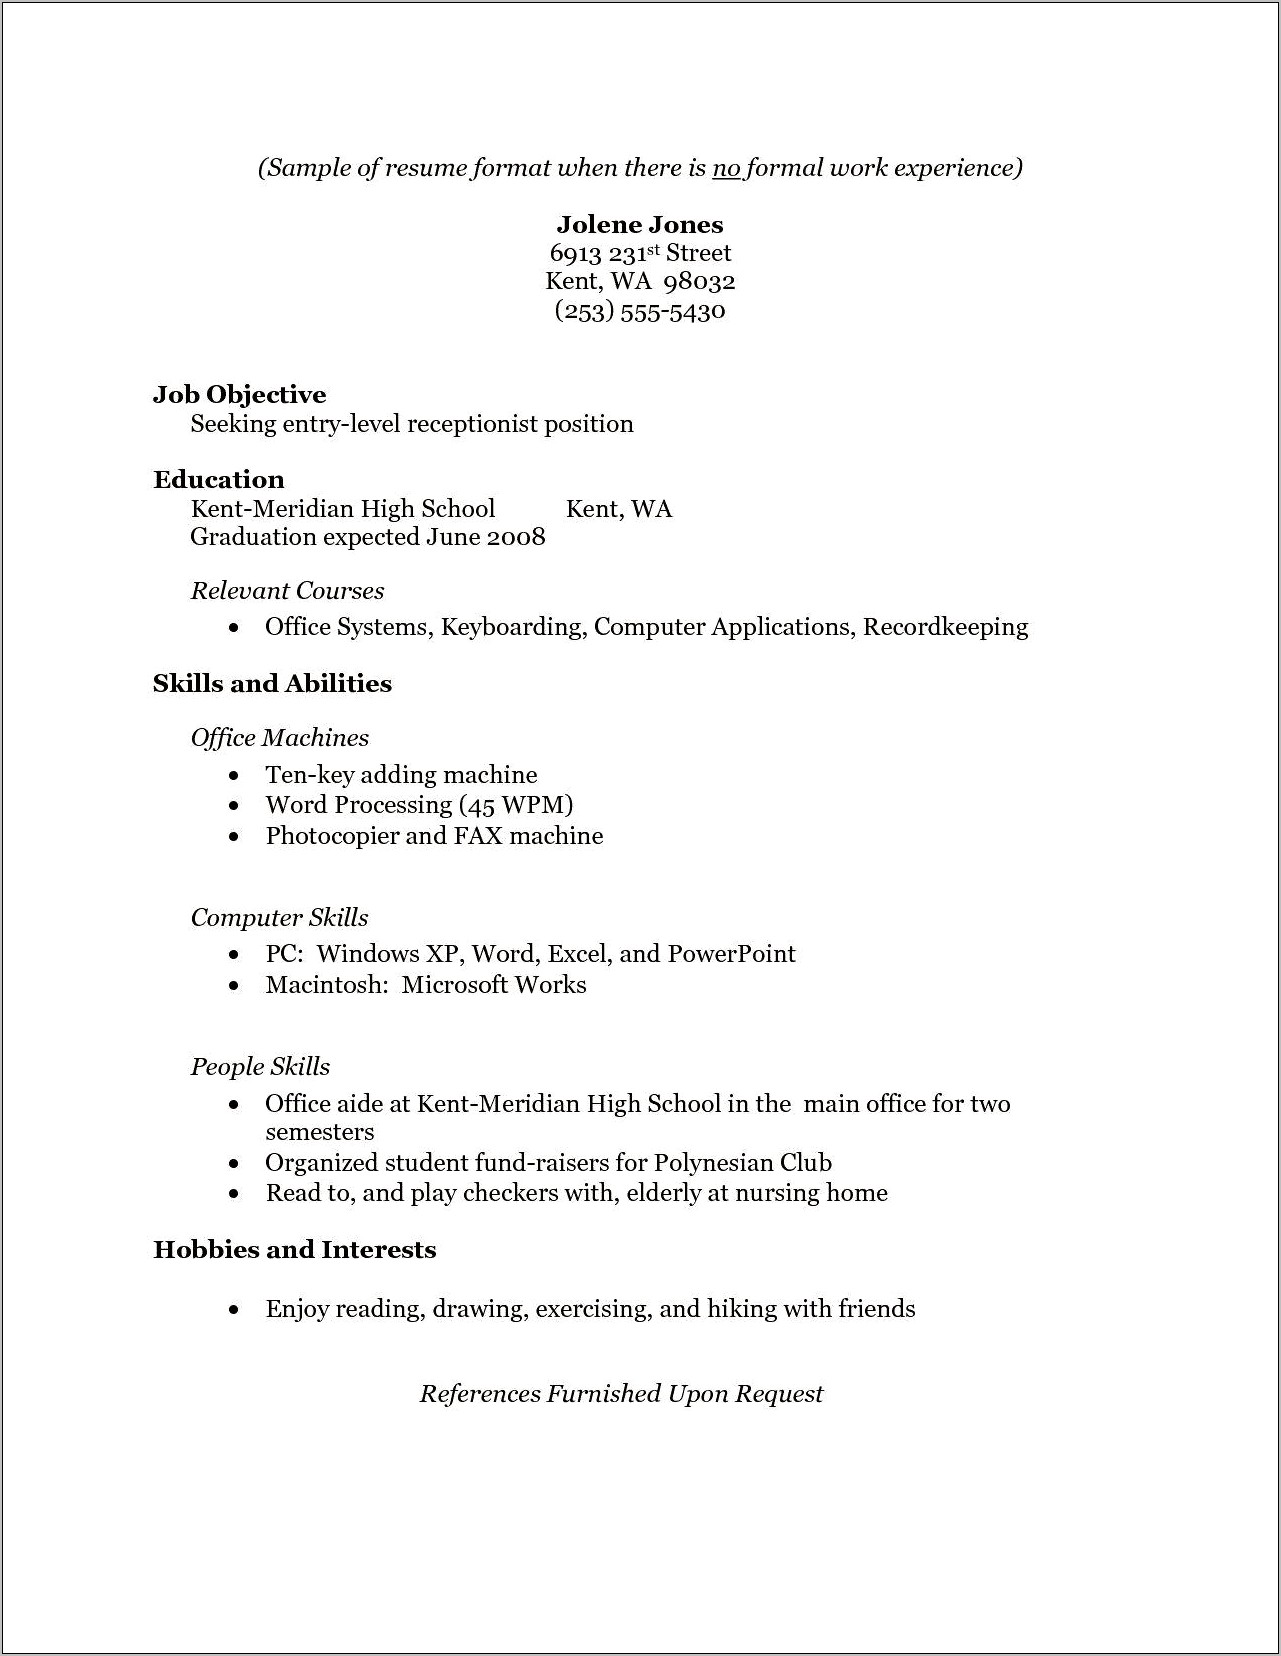 Resume Previous Work Experience Examples